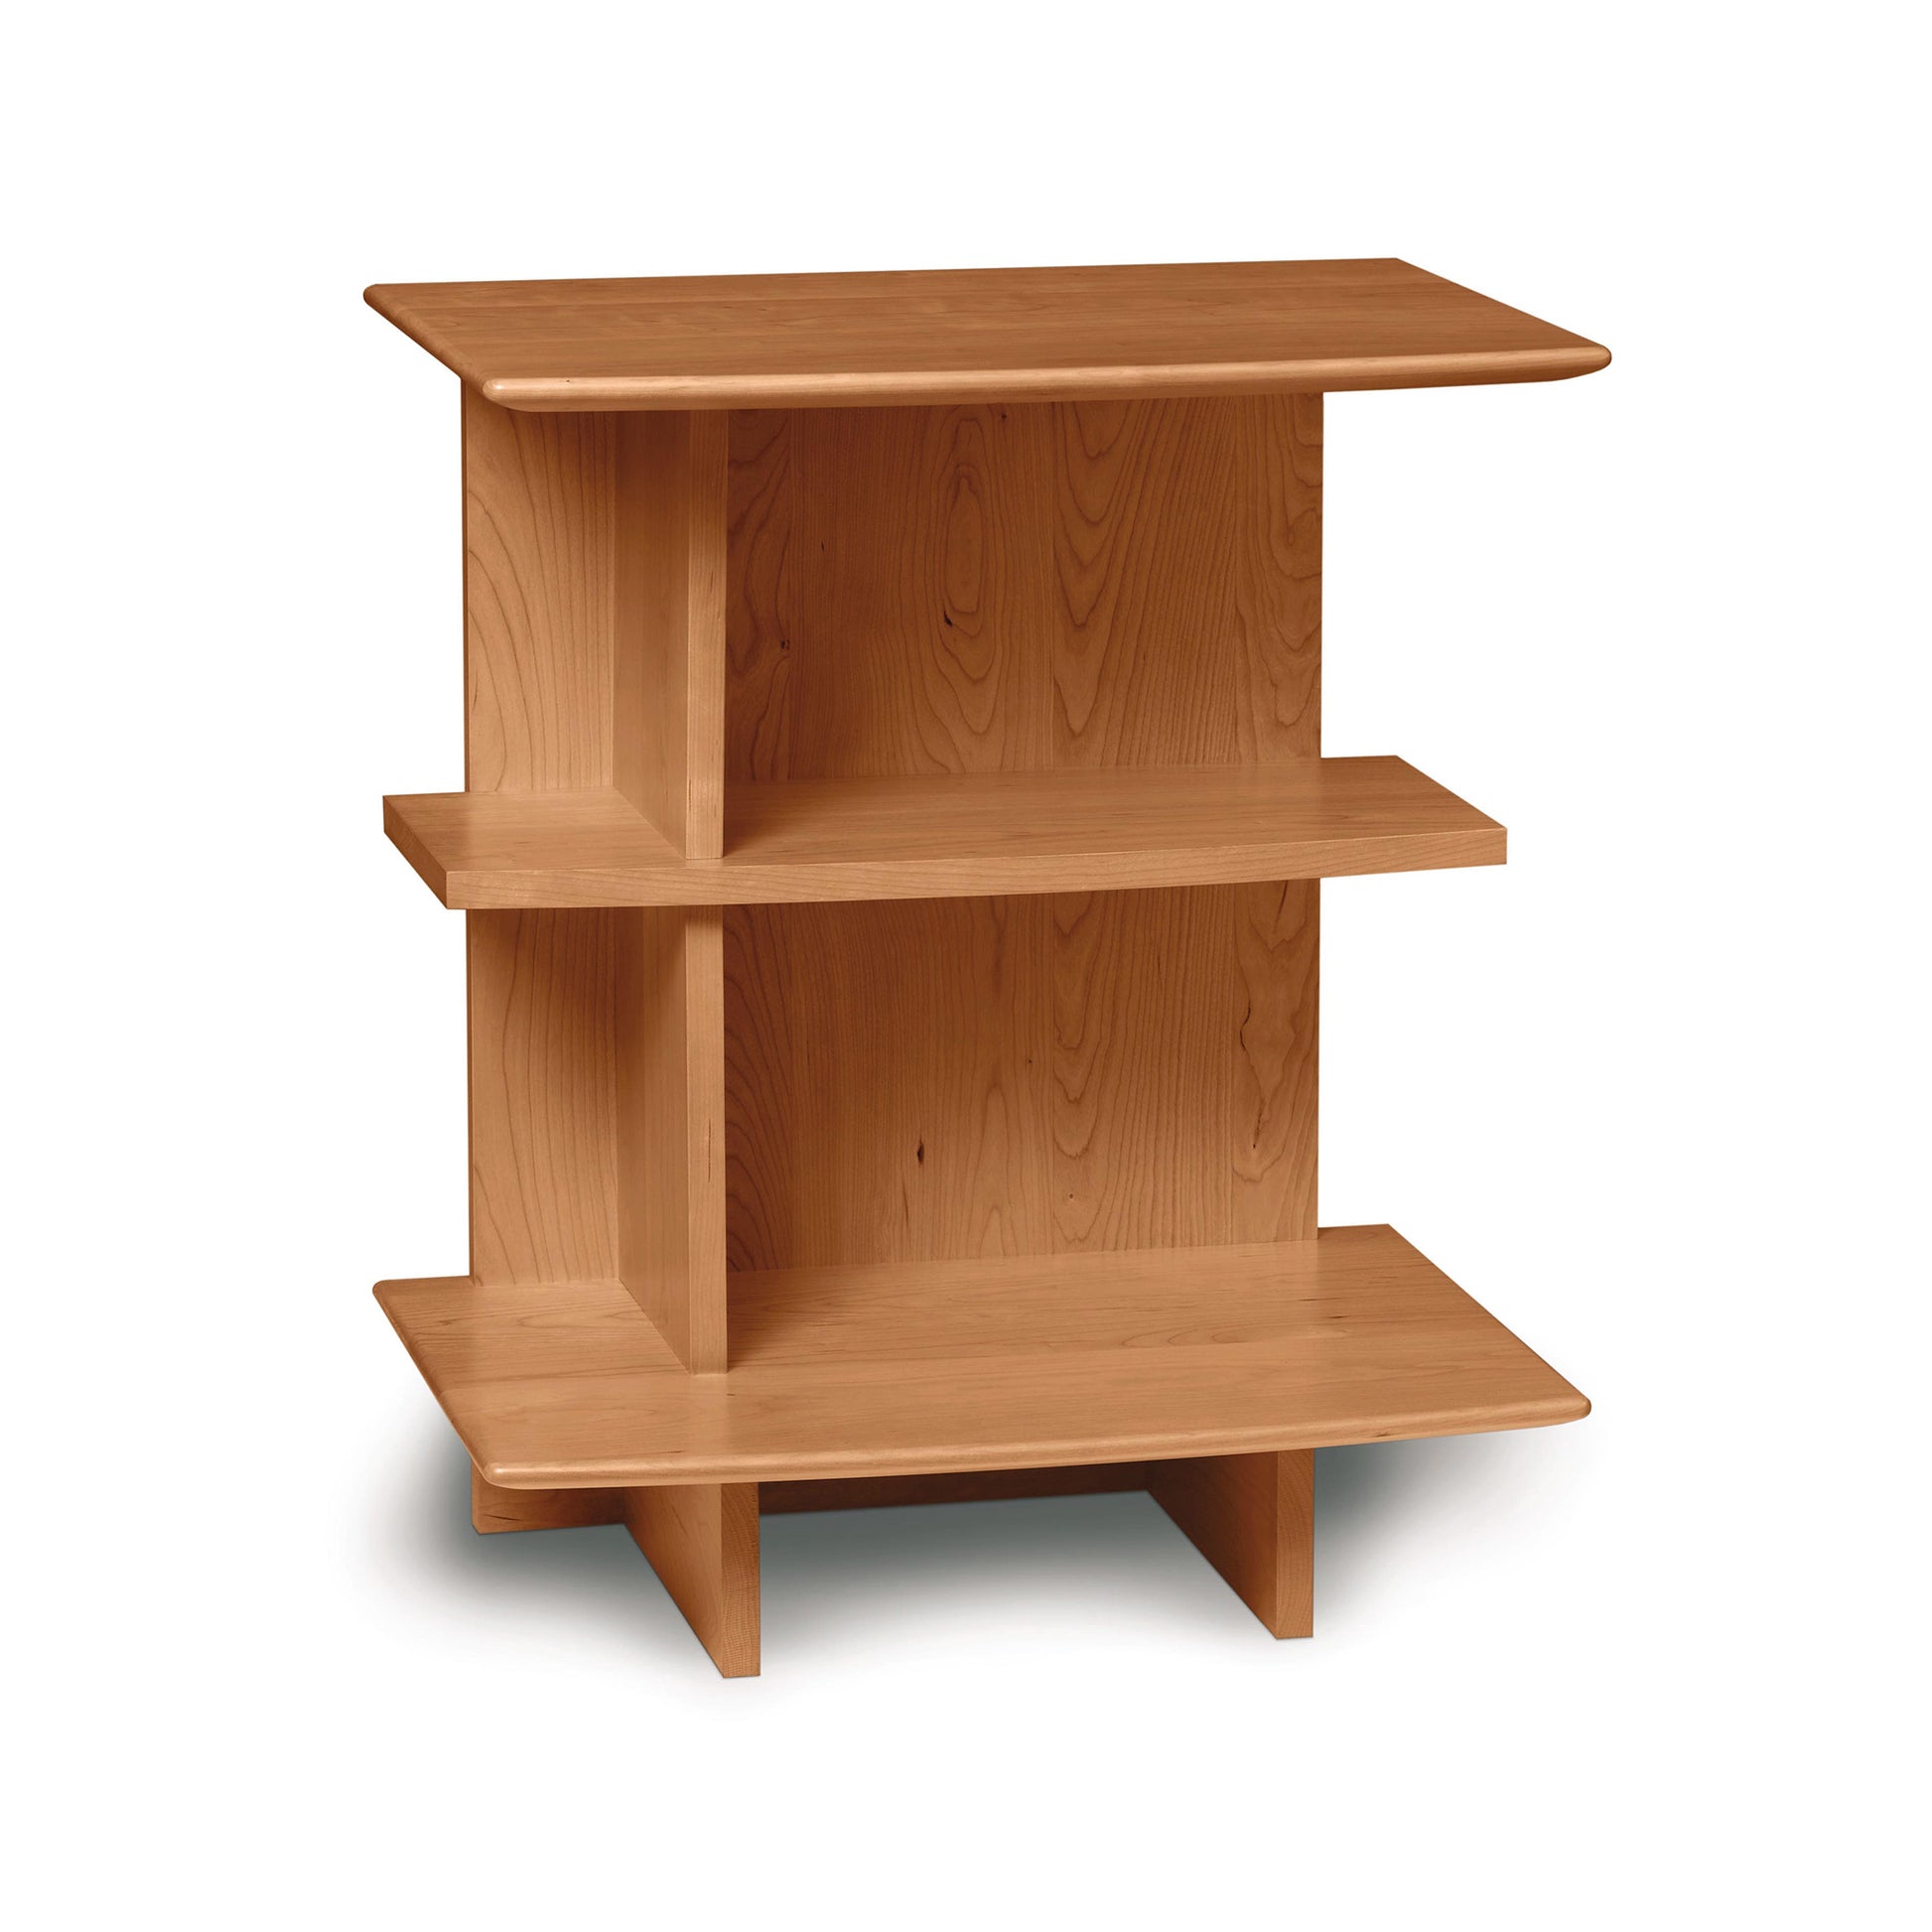 A wooden shelf with two shelves on it, featuring the Copeland Furniture's Sarah Open Shelf Nightstand solid wood design.